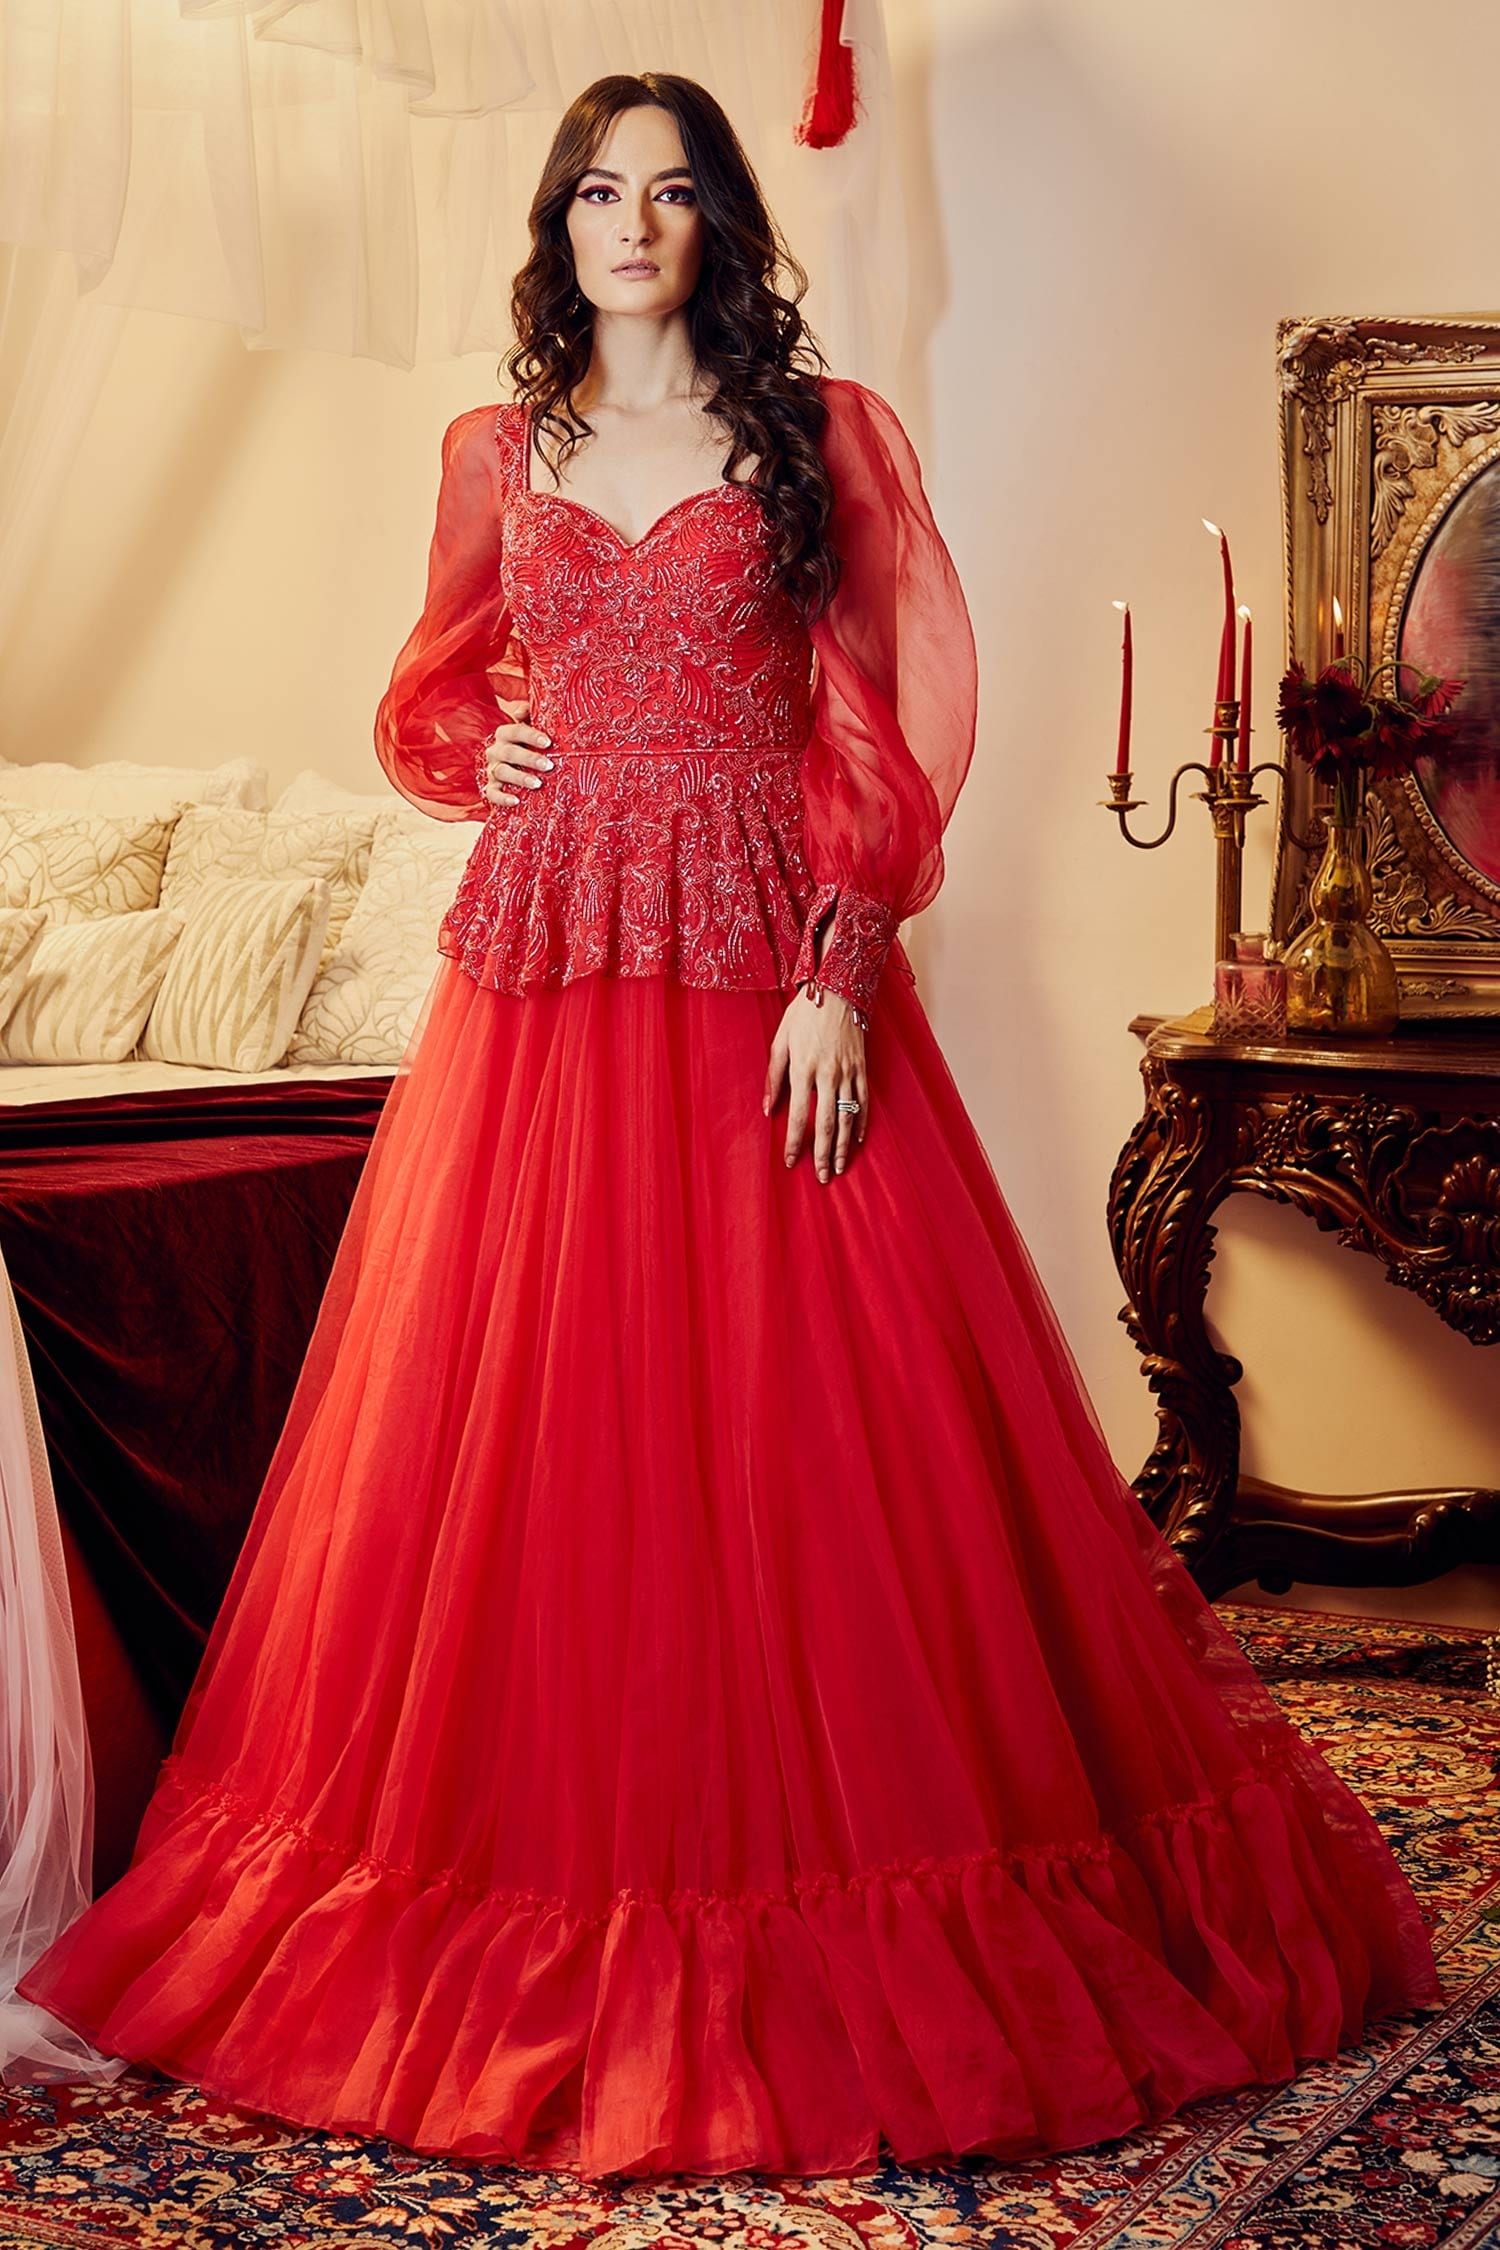 RED TRAIN BRIDAL GOWN – Ricco India